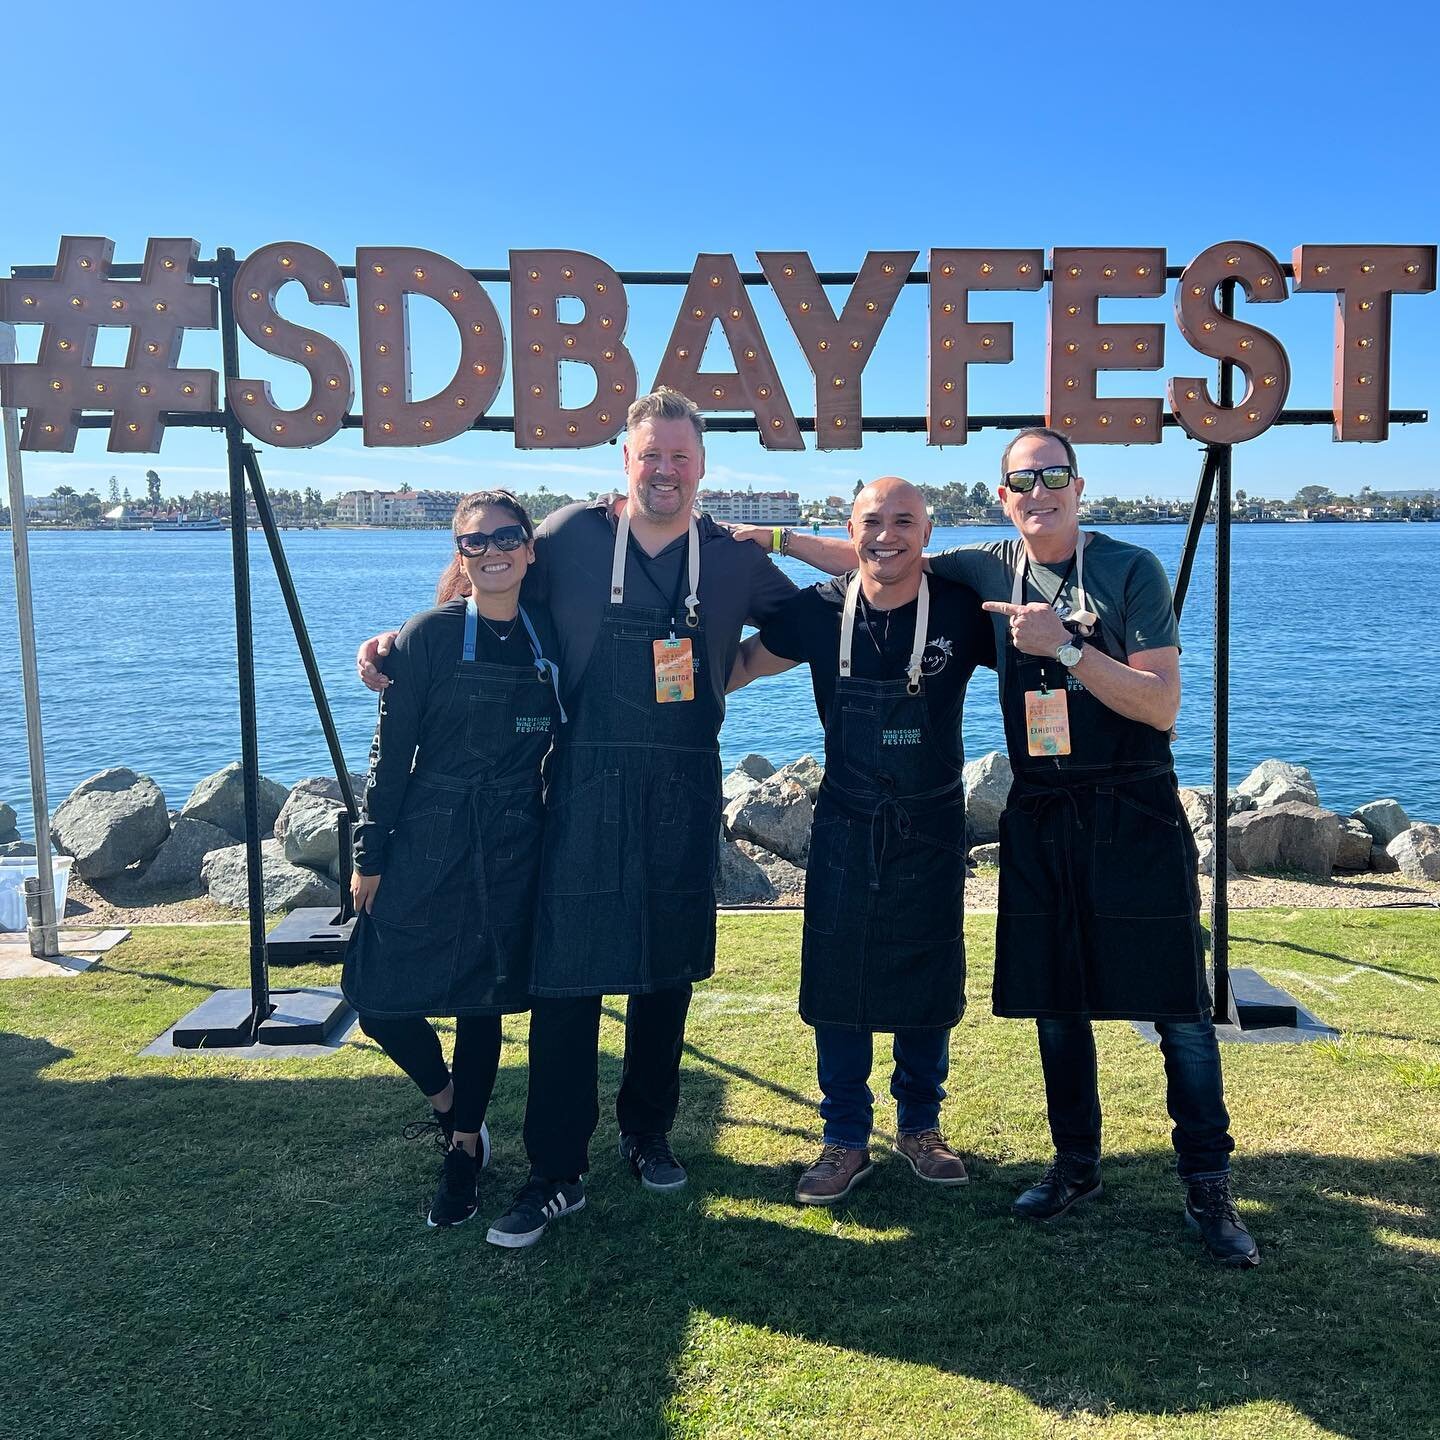 Winner winner oxtail dinner!!! Our small but mighty @grazebysam team  took 1st place at the @sdbayfest with our Braised Oxtail Italian Beef. Thank you Gavin, Louis &amp; Maura&hellip;what a crazy delicious day!!